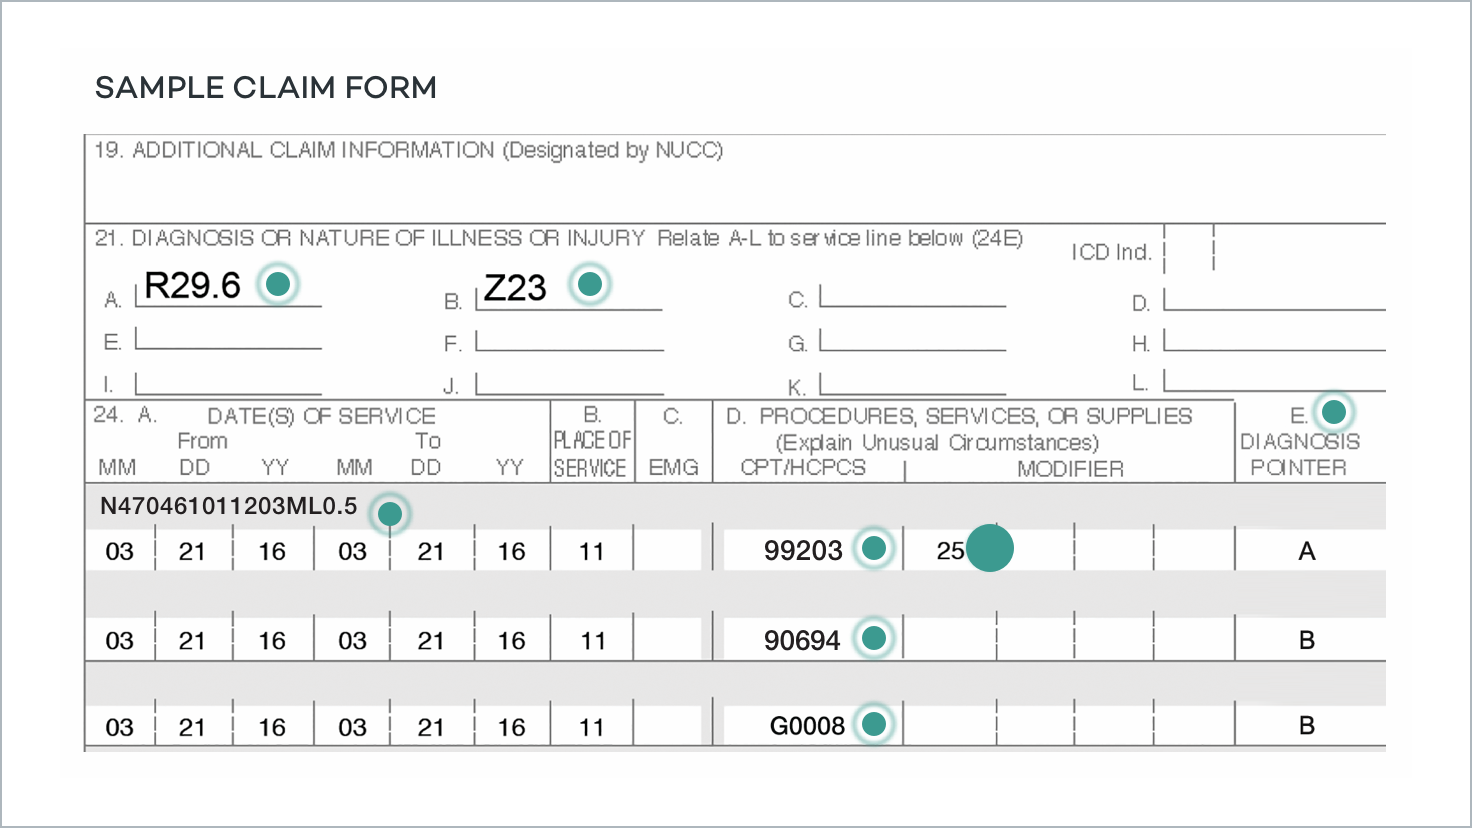 Coding and billing sample form highlighting code for modifier 25